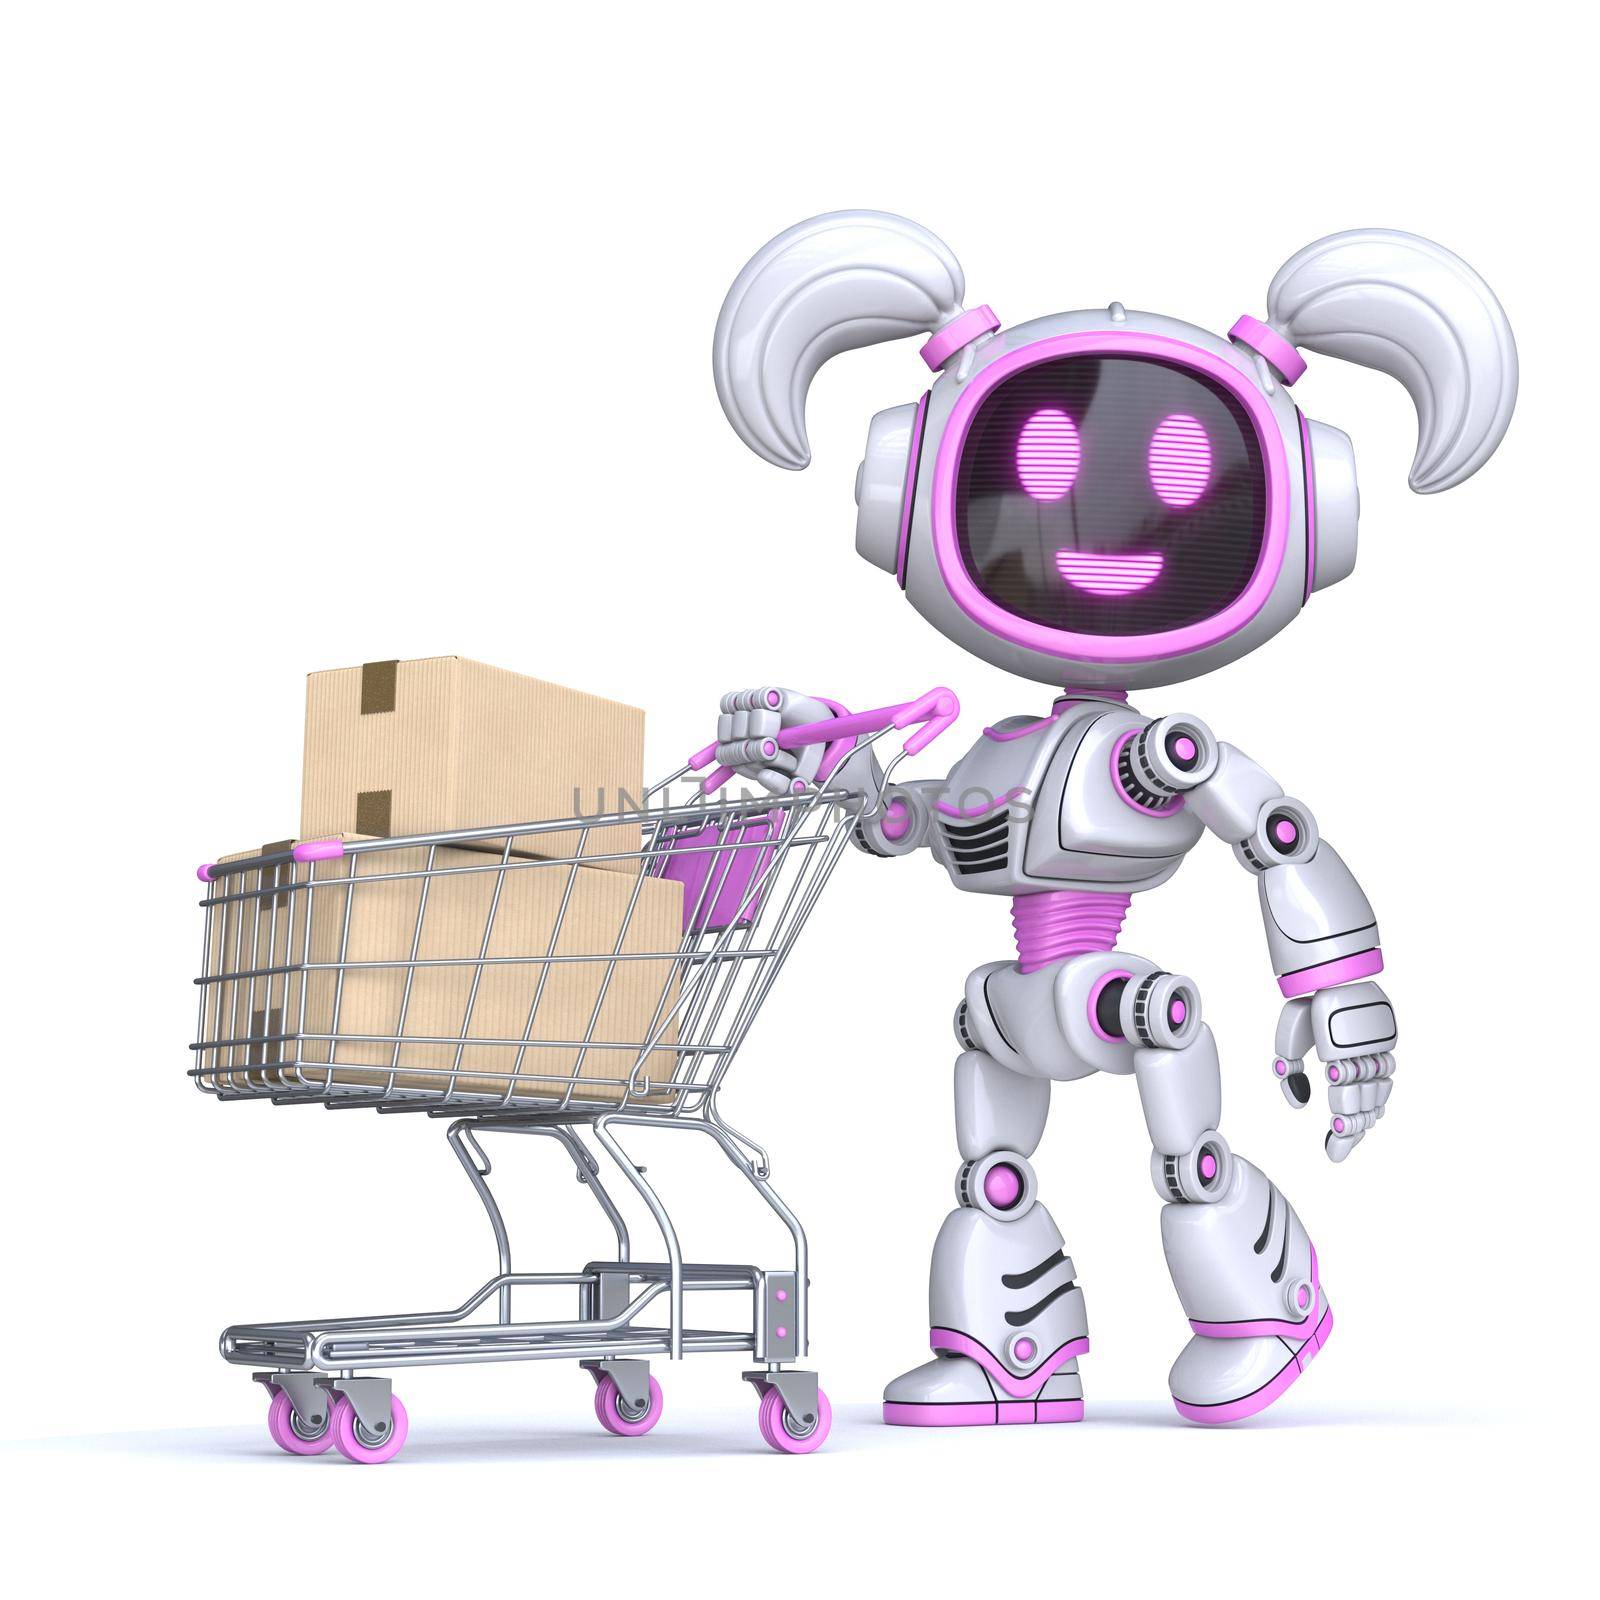 Cute pink girl robot push shopping cart 3D rendering illustration isolated on white background